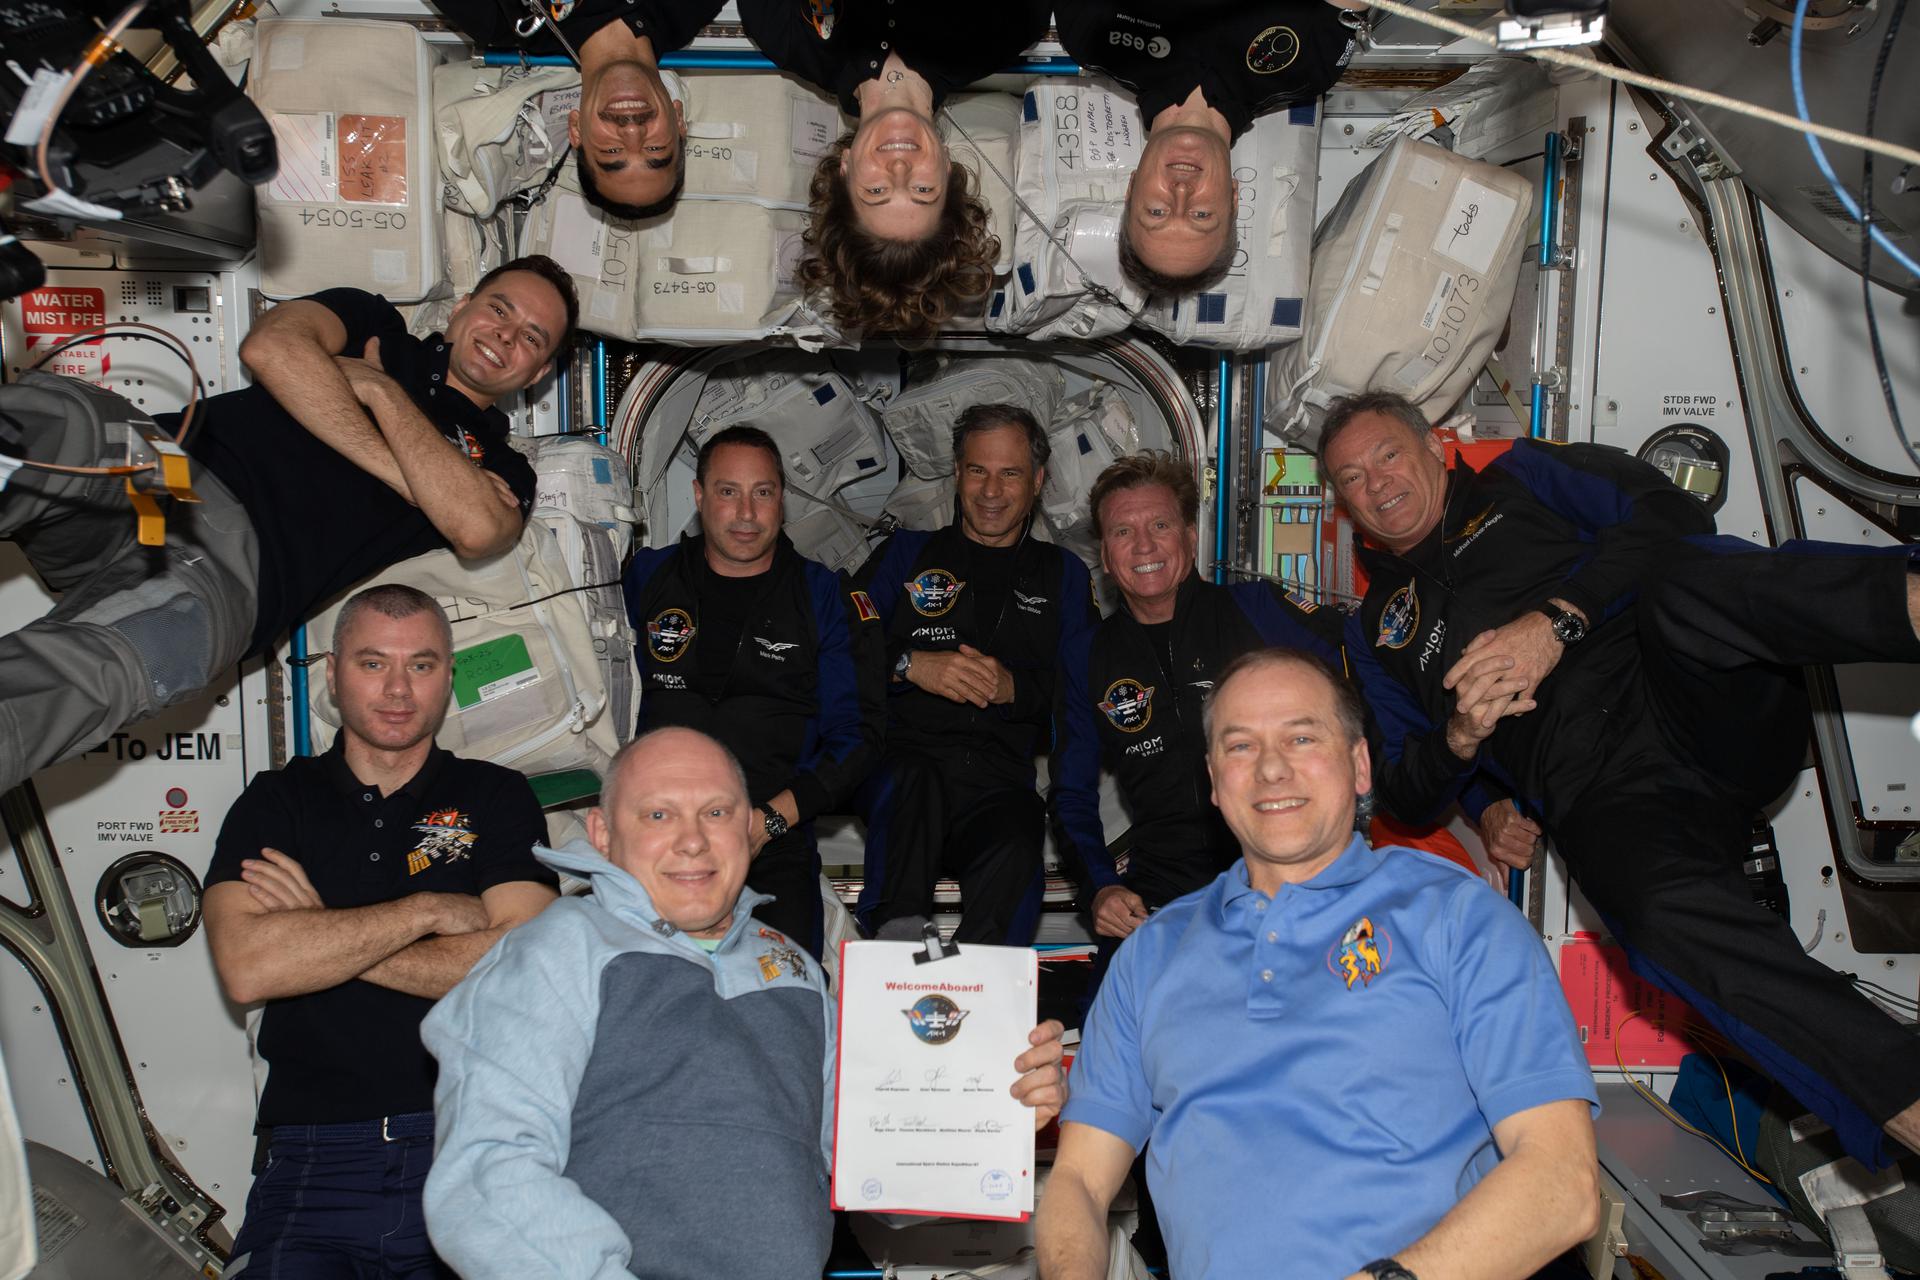 The four members of the Axiom-1 mission occupy the center row in this image of the full 11-person crew aboard the ISS on 9 april 2022